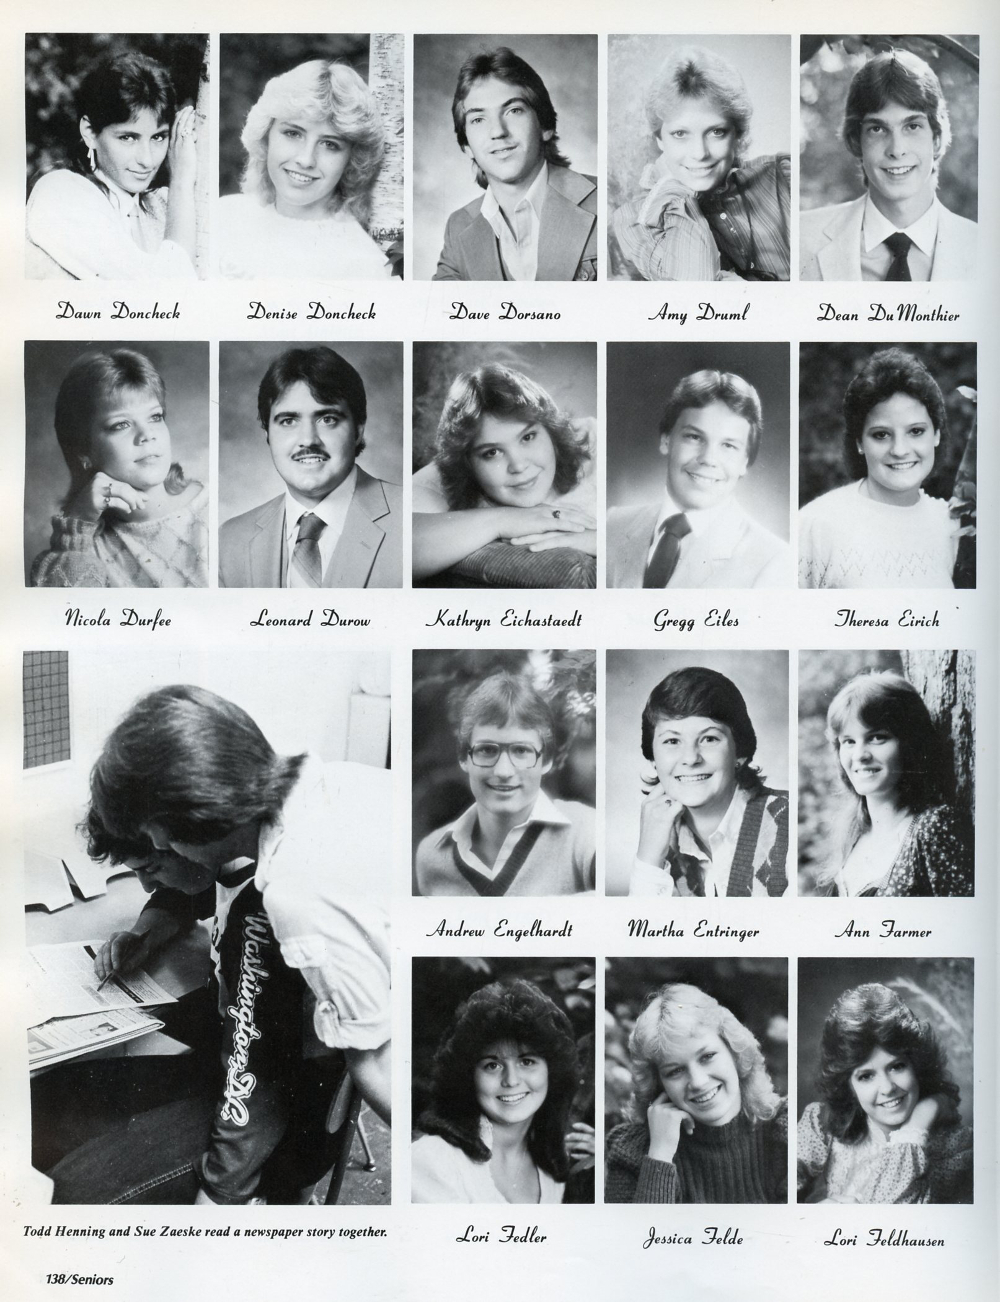 Yearbook 138